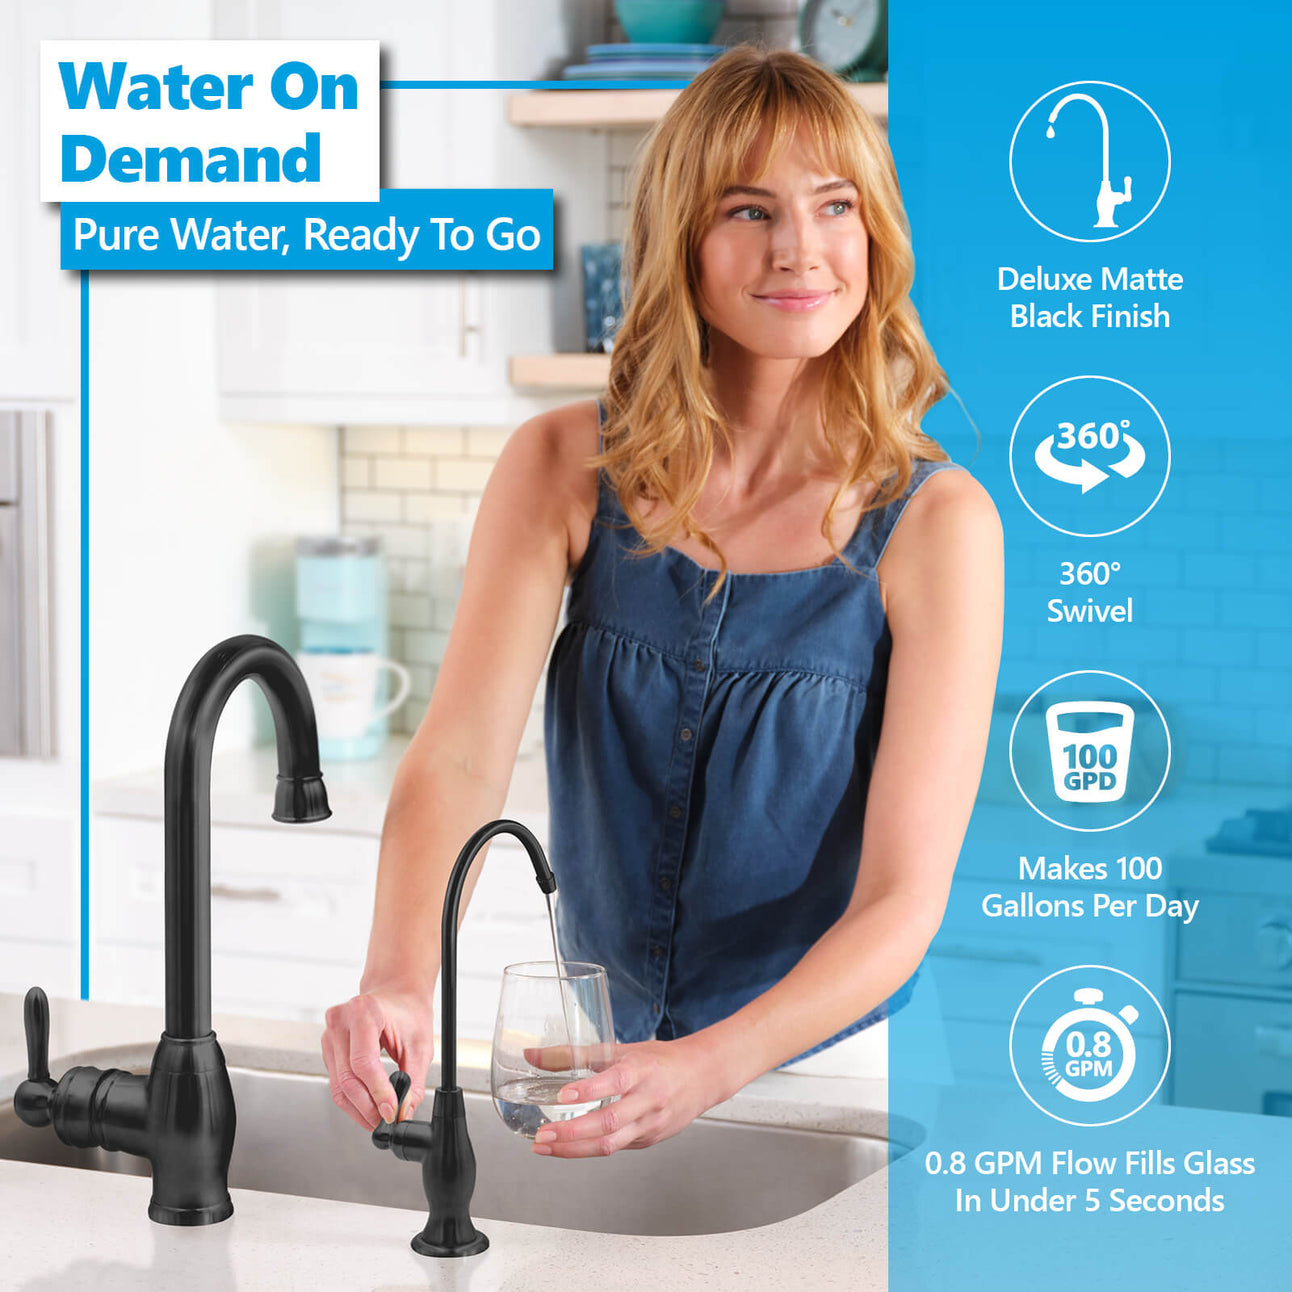 Deionization RO System with deluxe matte black faucet